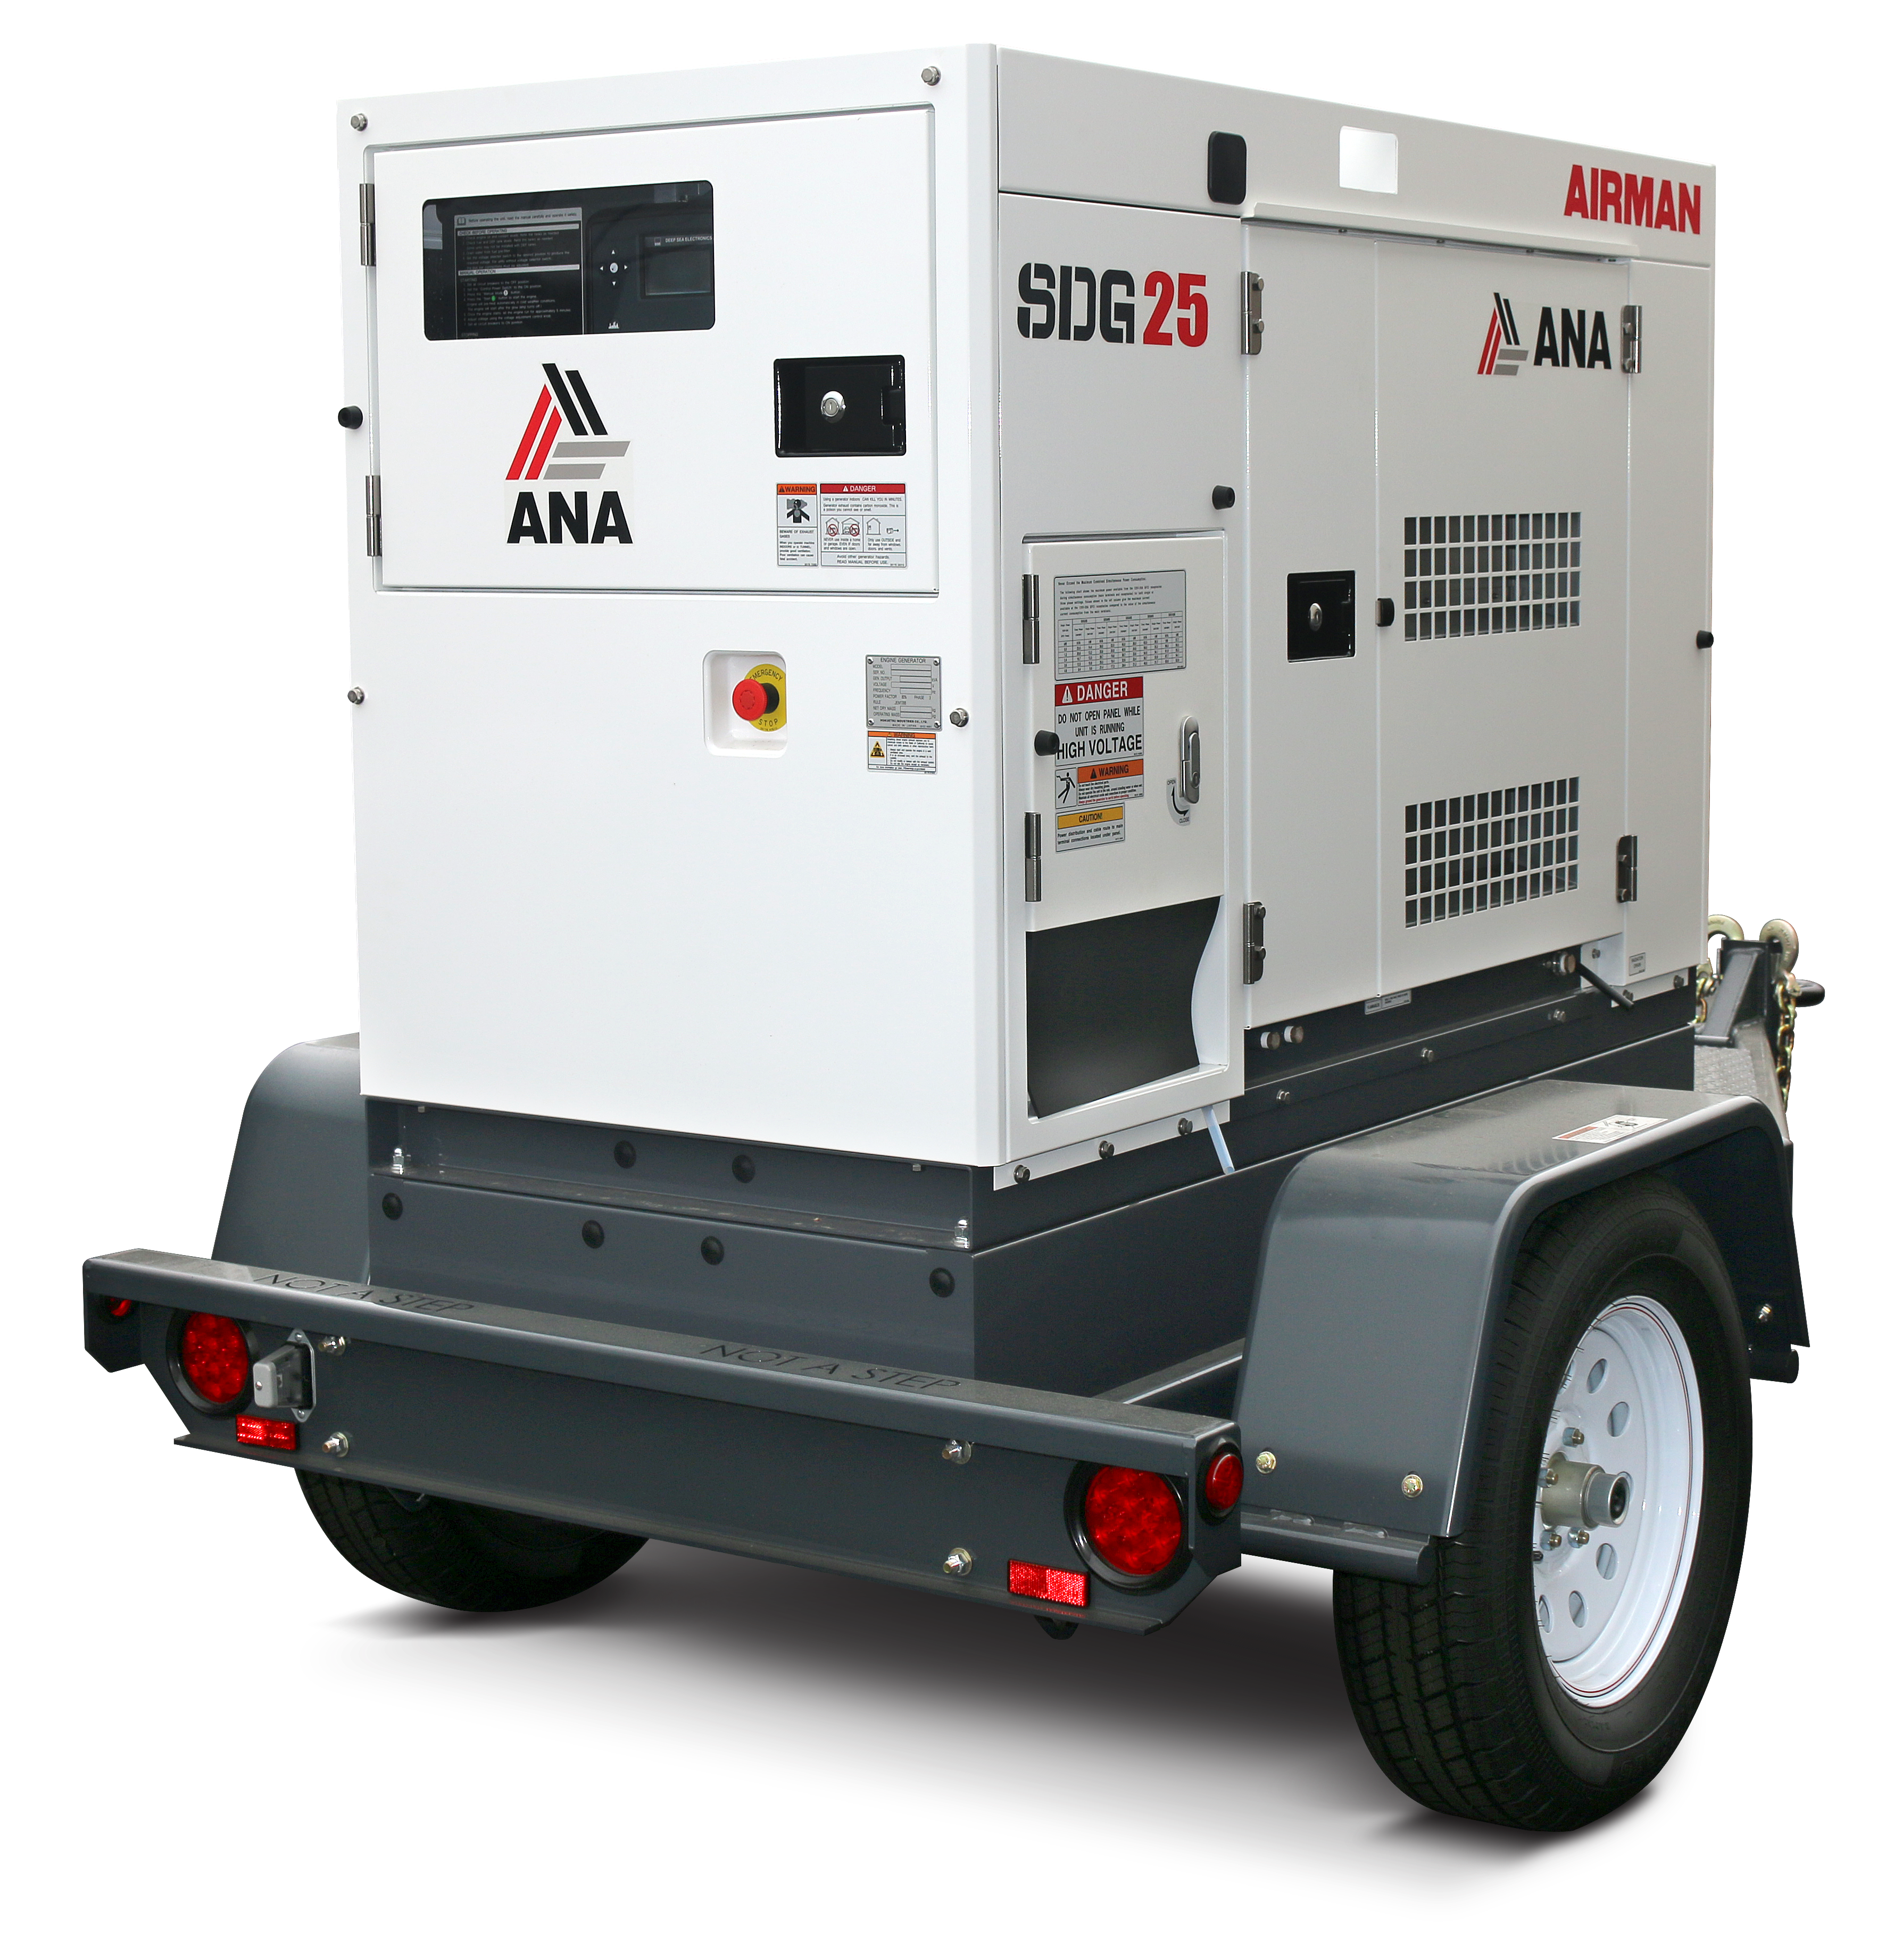 The SDG25 generator from AIRMAN, with its Isuzu diesel engine, runs over 32 hours at full load, delivering 20kW of prime power. Auto start is a standard feature and has the industry’s best automatic voltage regulation of +/- 0.5% and an exterior potentiometer allowing for precise voltage selection.